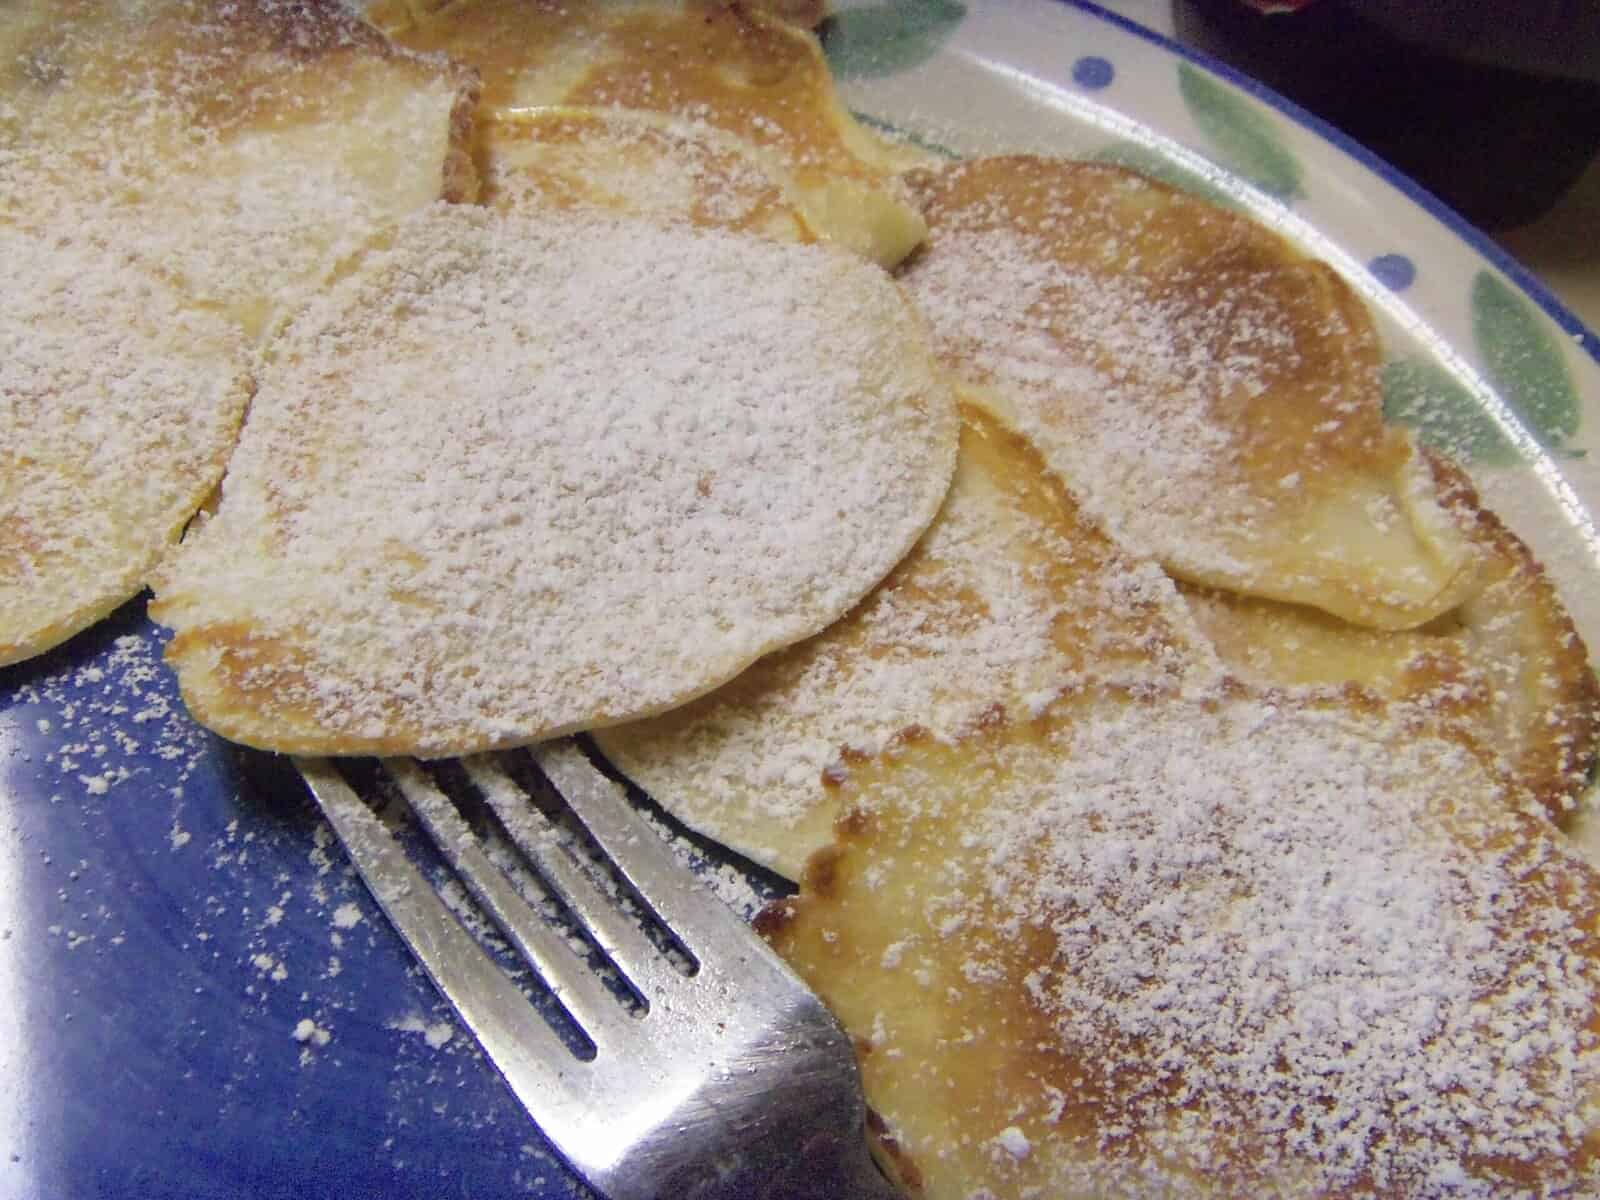  Perfect for breakfast or dessert, these pancakes are impossible to resist.